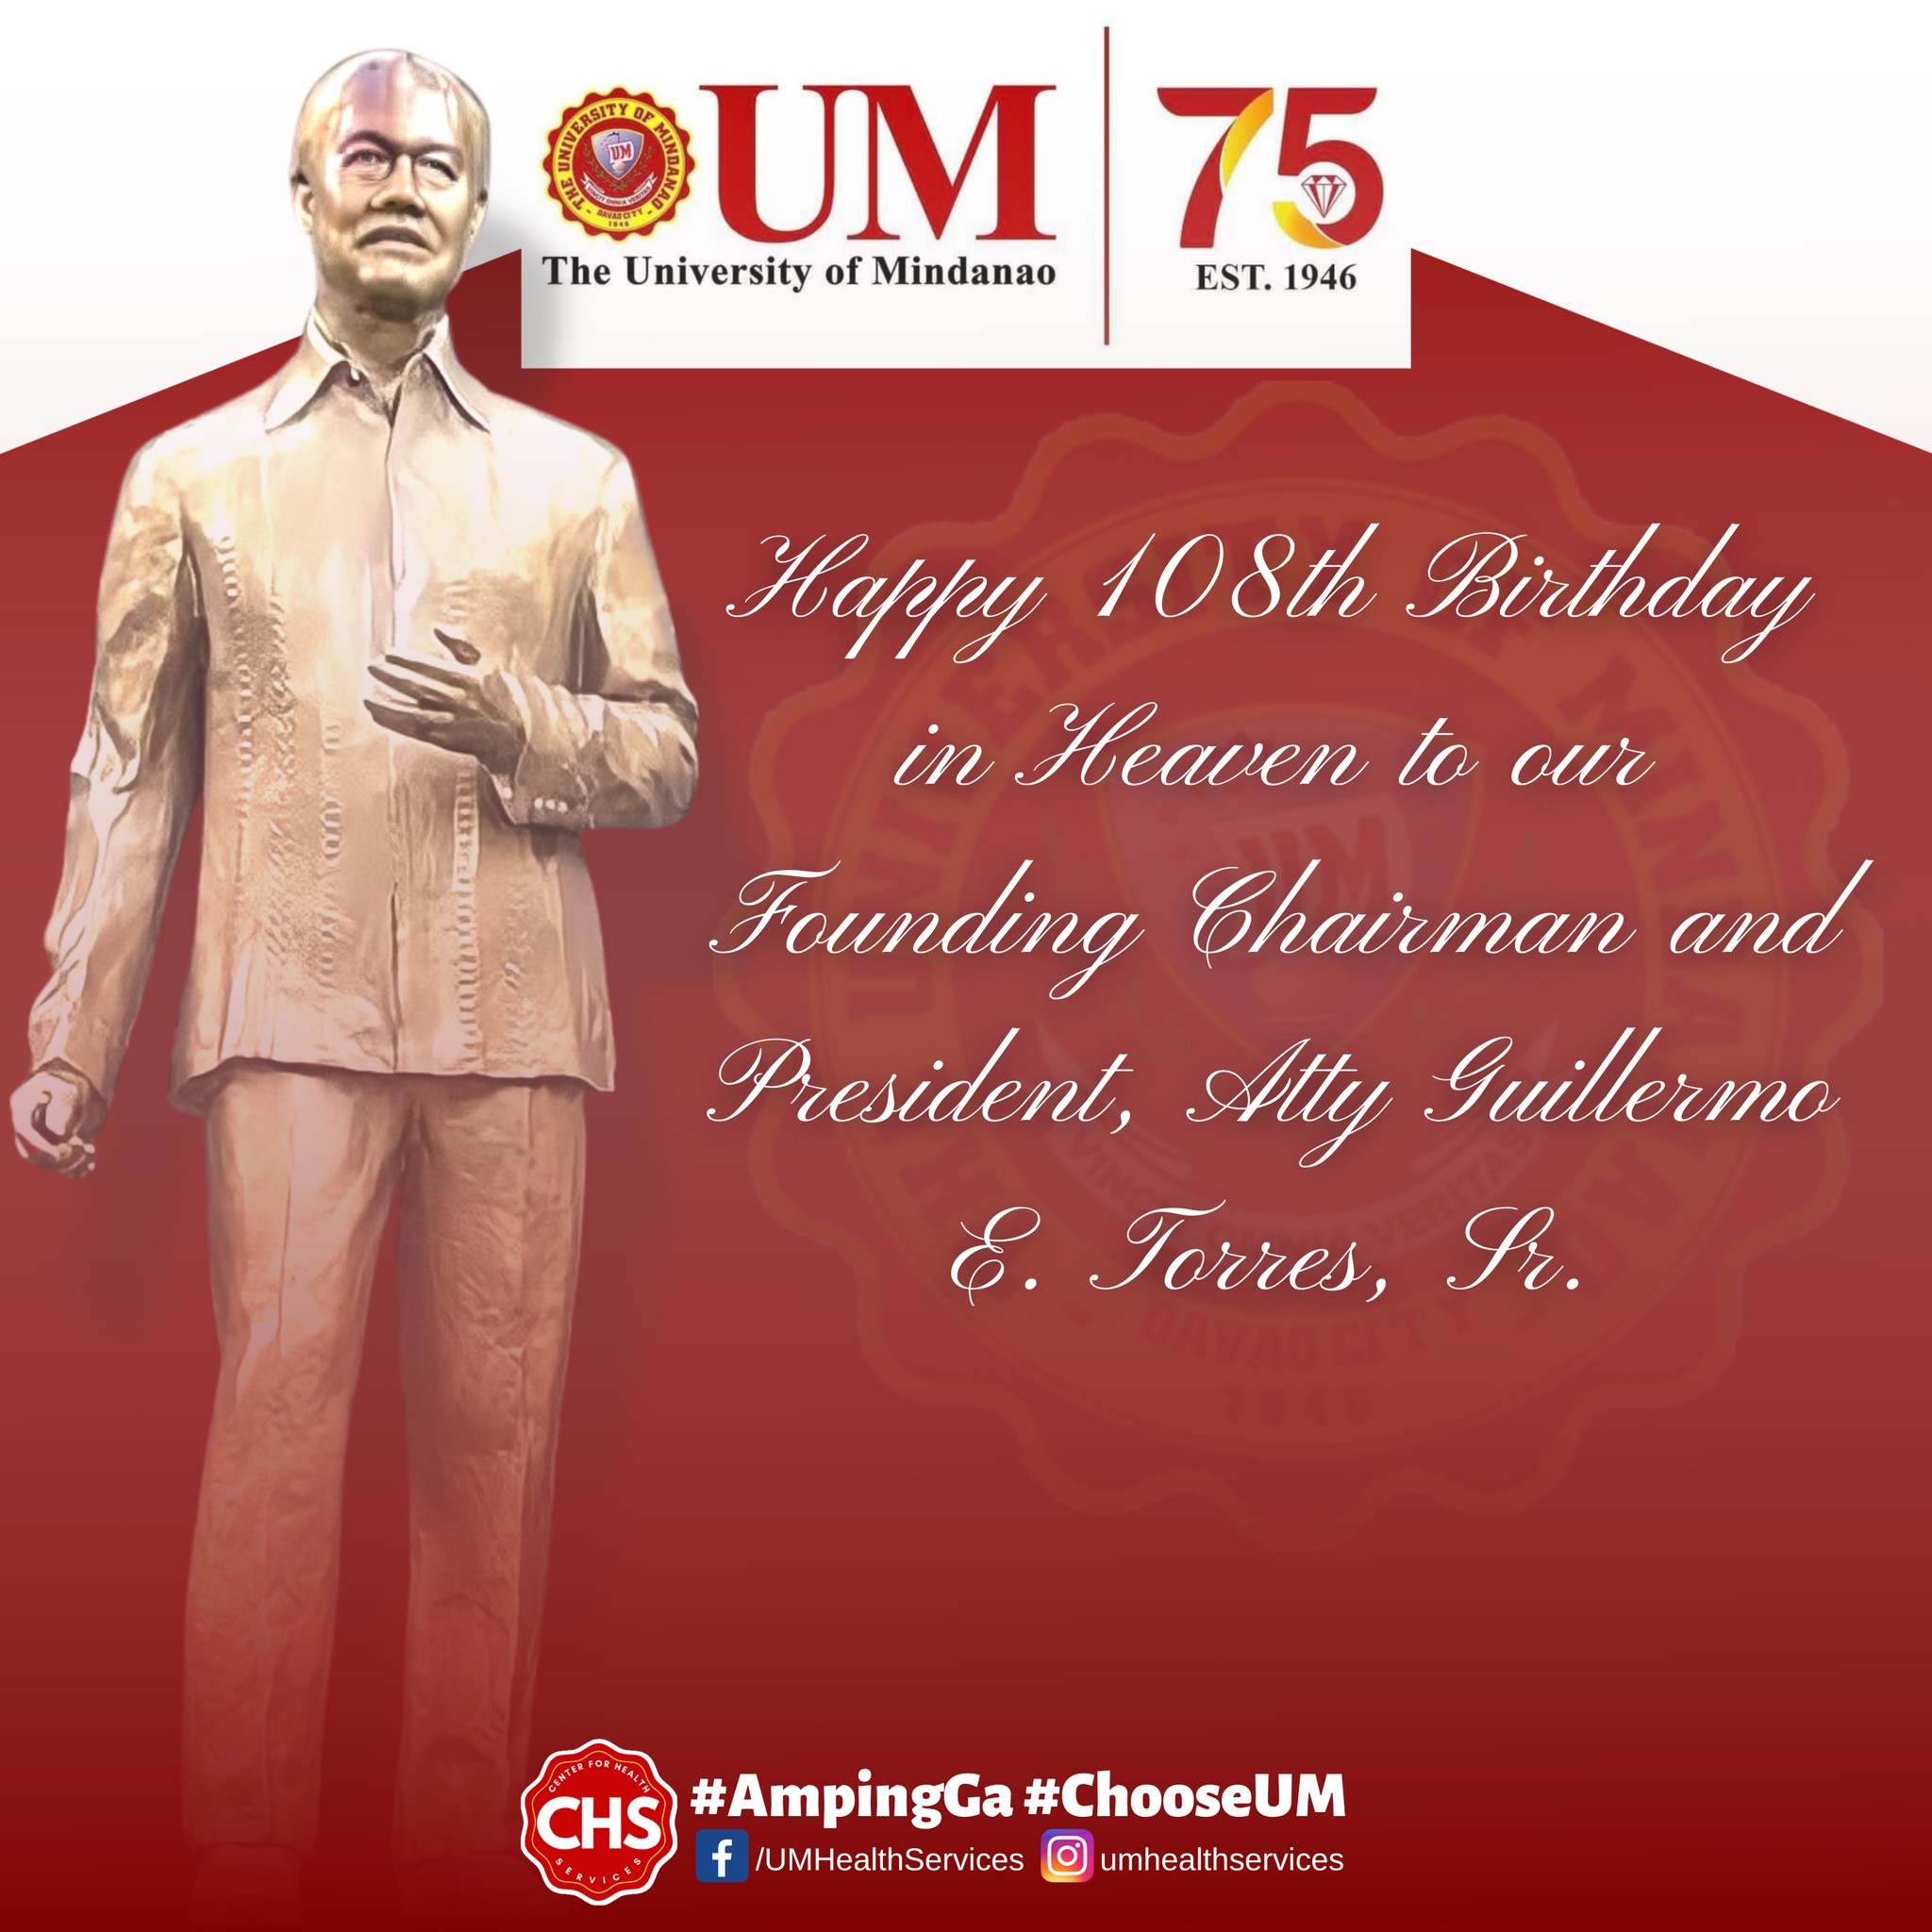 Remembering our founder, Atty. Guillermo E. Torres on his 108th birthday